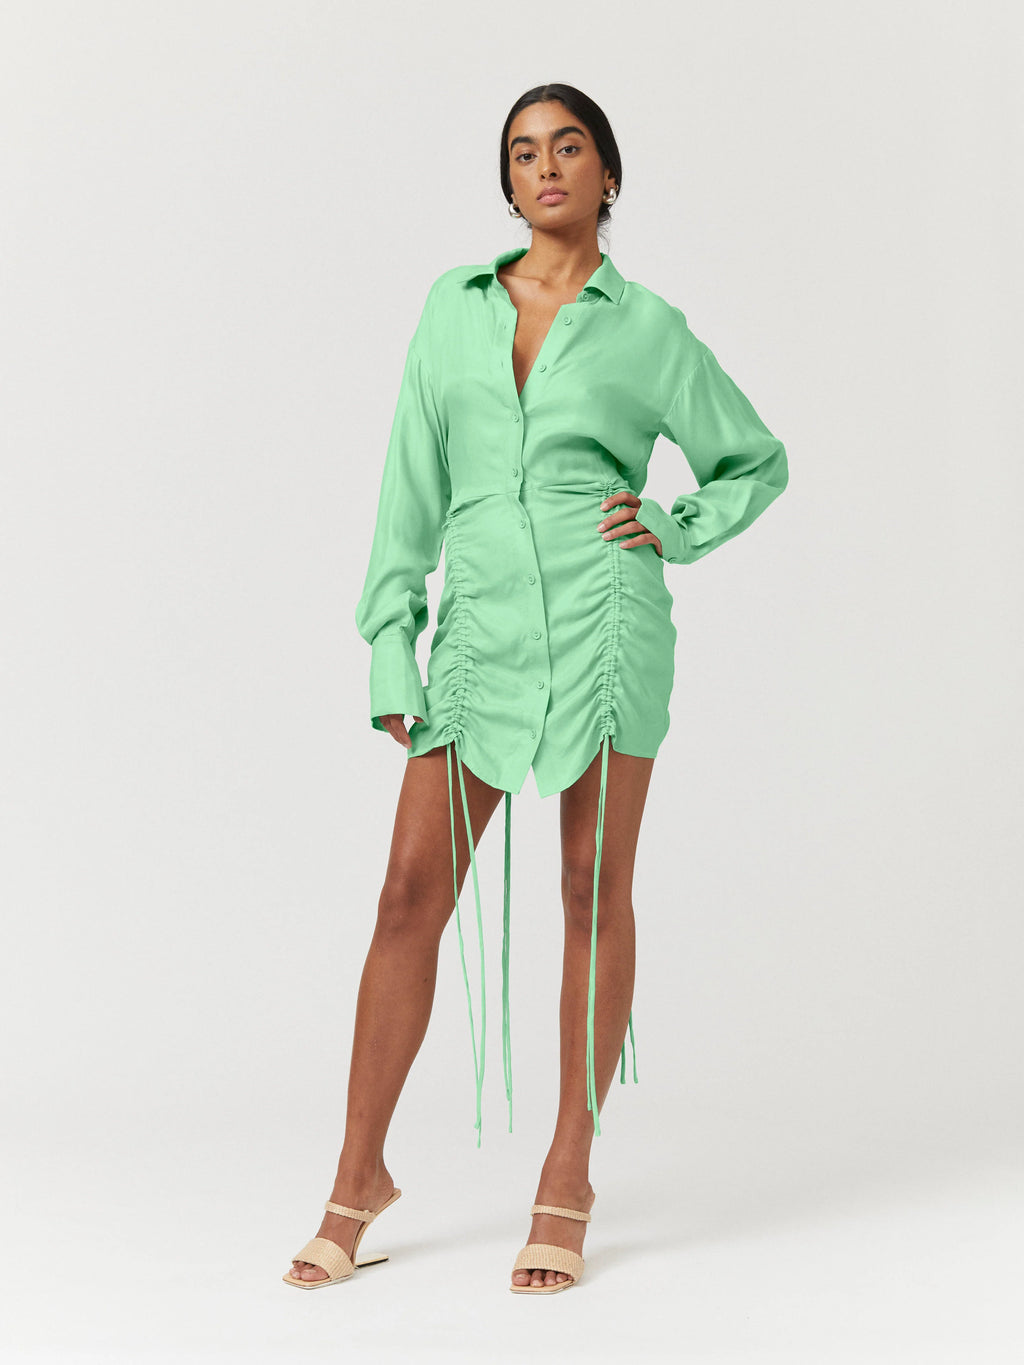 Suboo - Halley Rouched Mini Shirt Dress - Apple Green